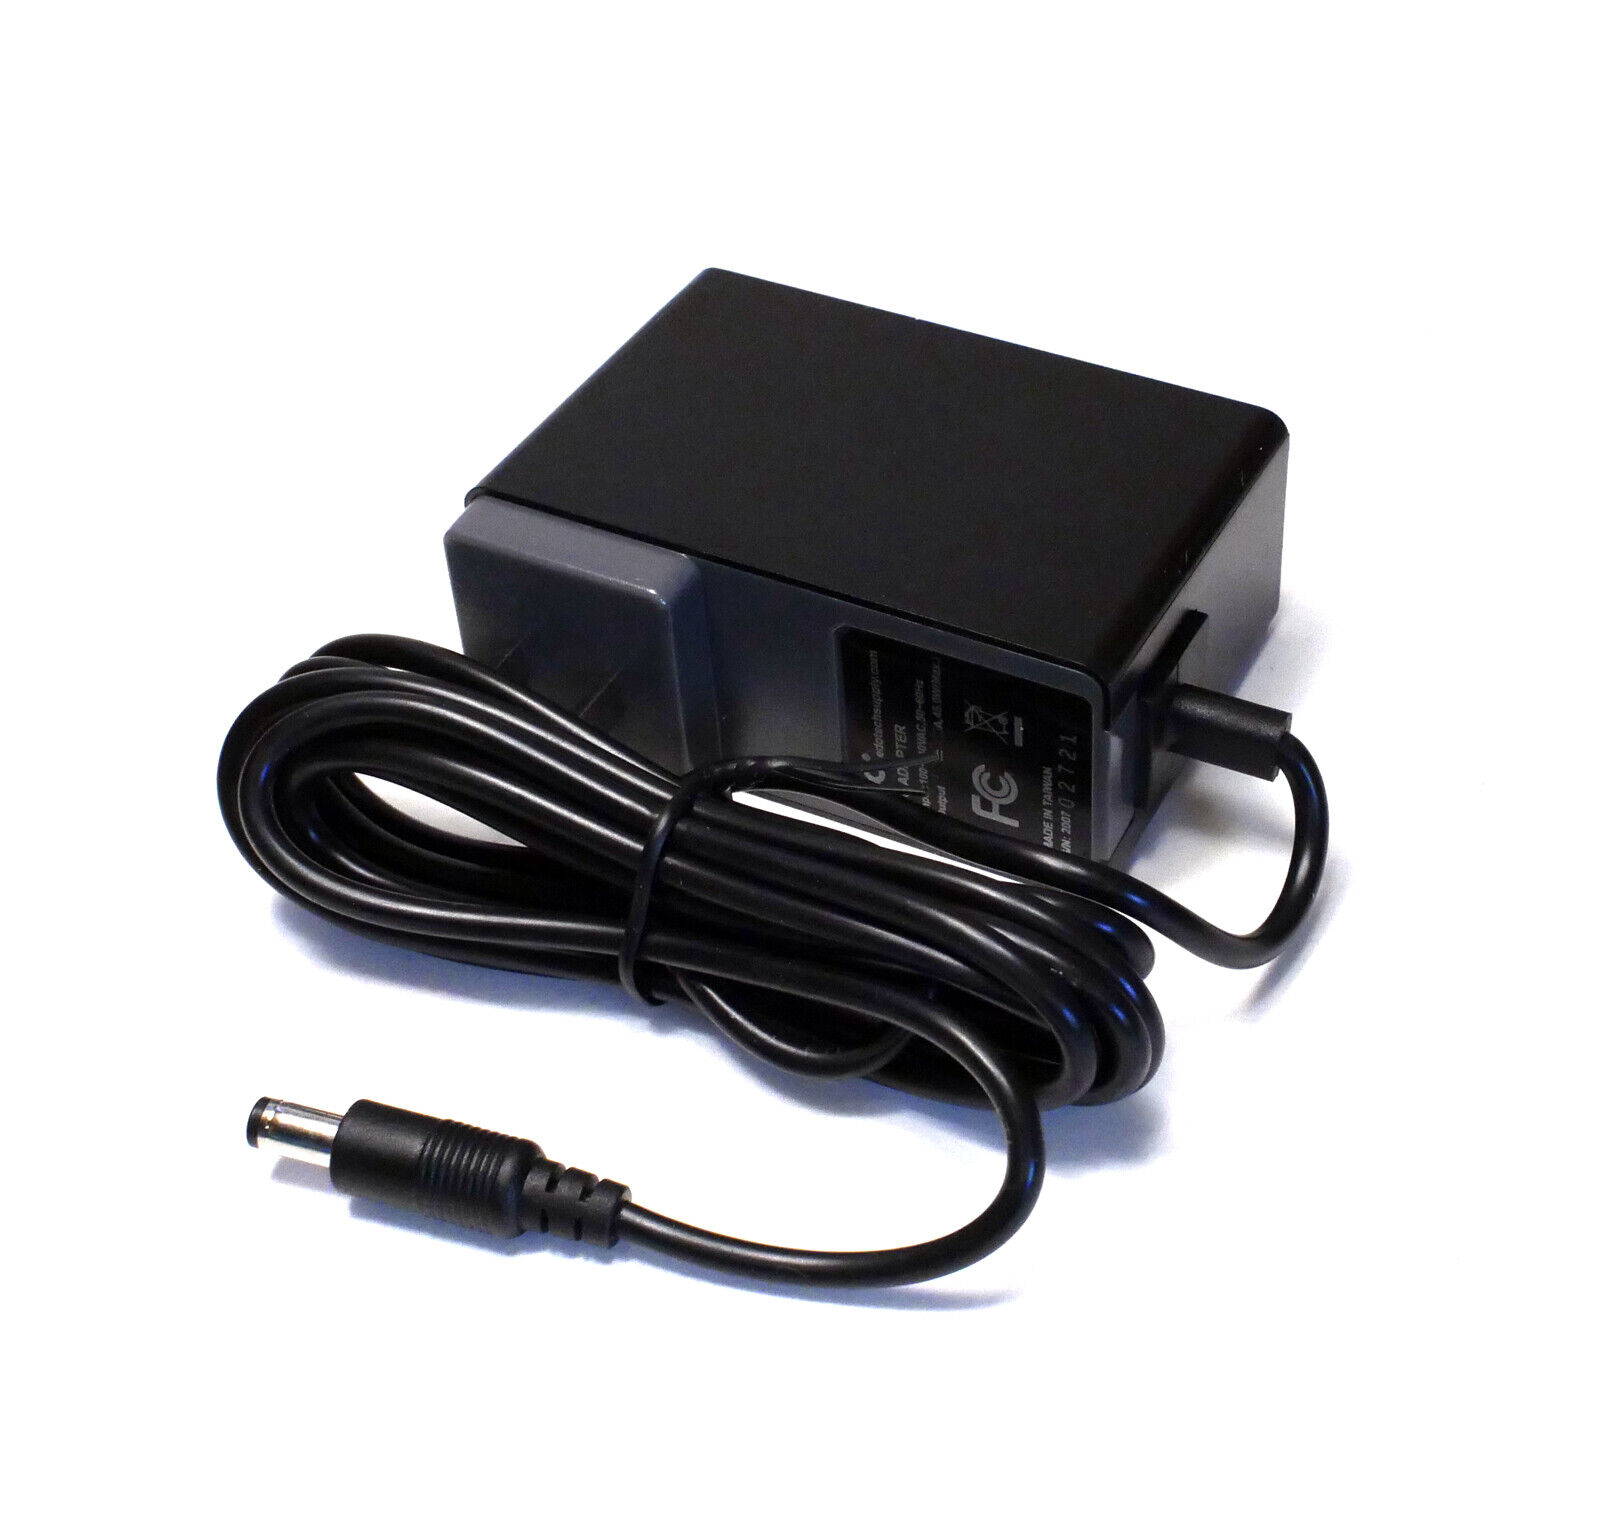 12V AC Adapter Power Supply Cord for Sirius Radio Boombox Sportster SP-B1 SP-B1A